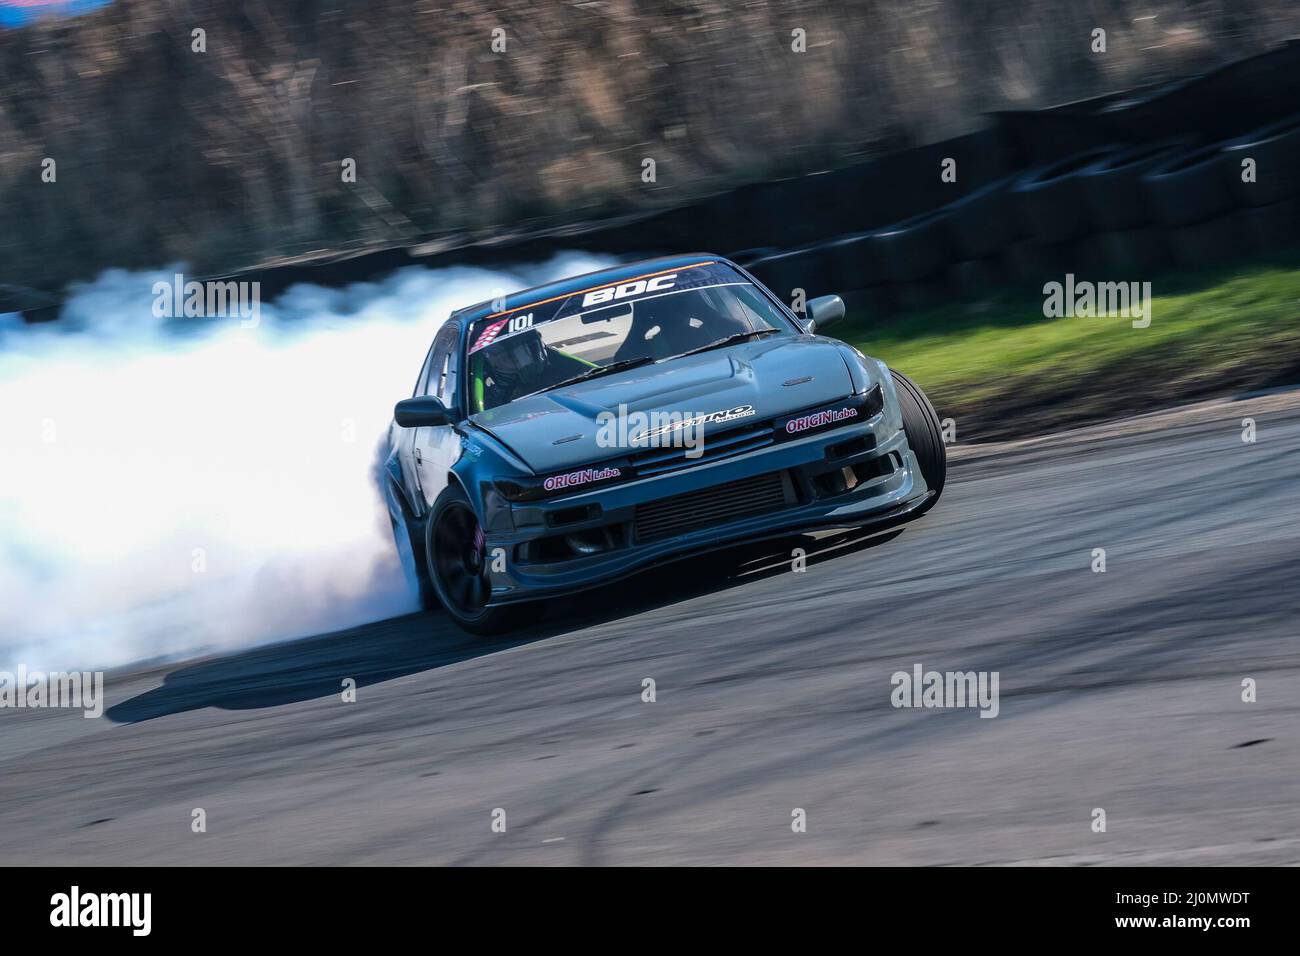 Middlesbrough, UK. 20th Mar, 2022. Mitch Gibbons Nissan S14 Teeside Autodrome, Middlesbrough, United Kingdom on 20 March 2022 during Round 1 of the 2022 British Drift Championship, Craig McAllister Credit: Every Second Media/Alamy Live News Stock Photo